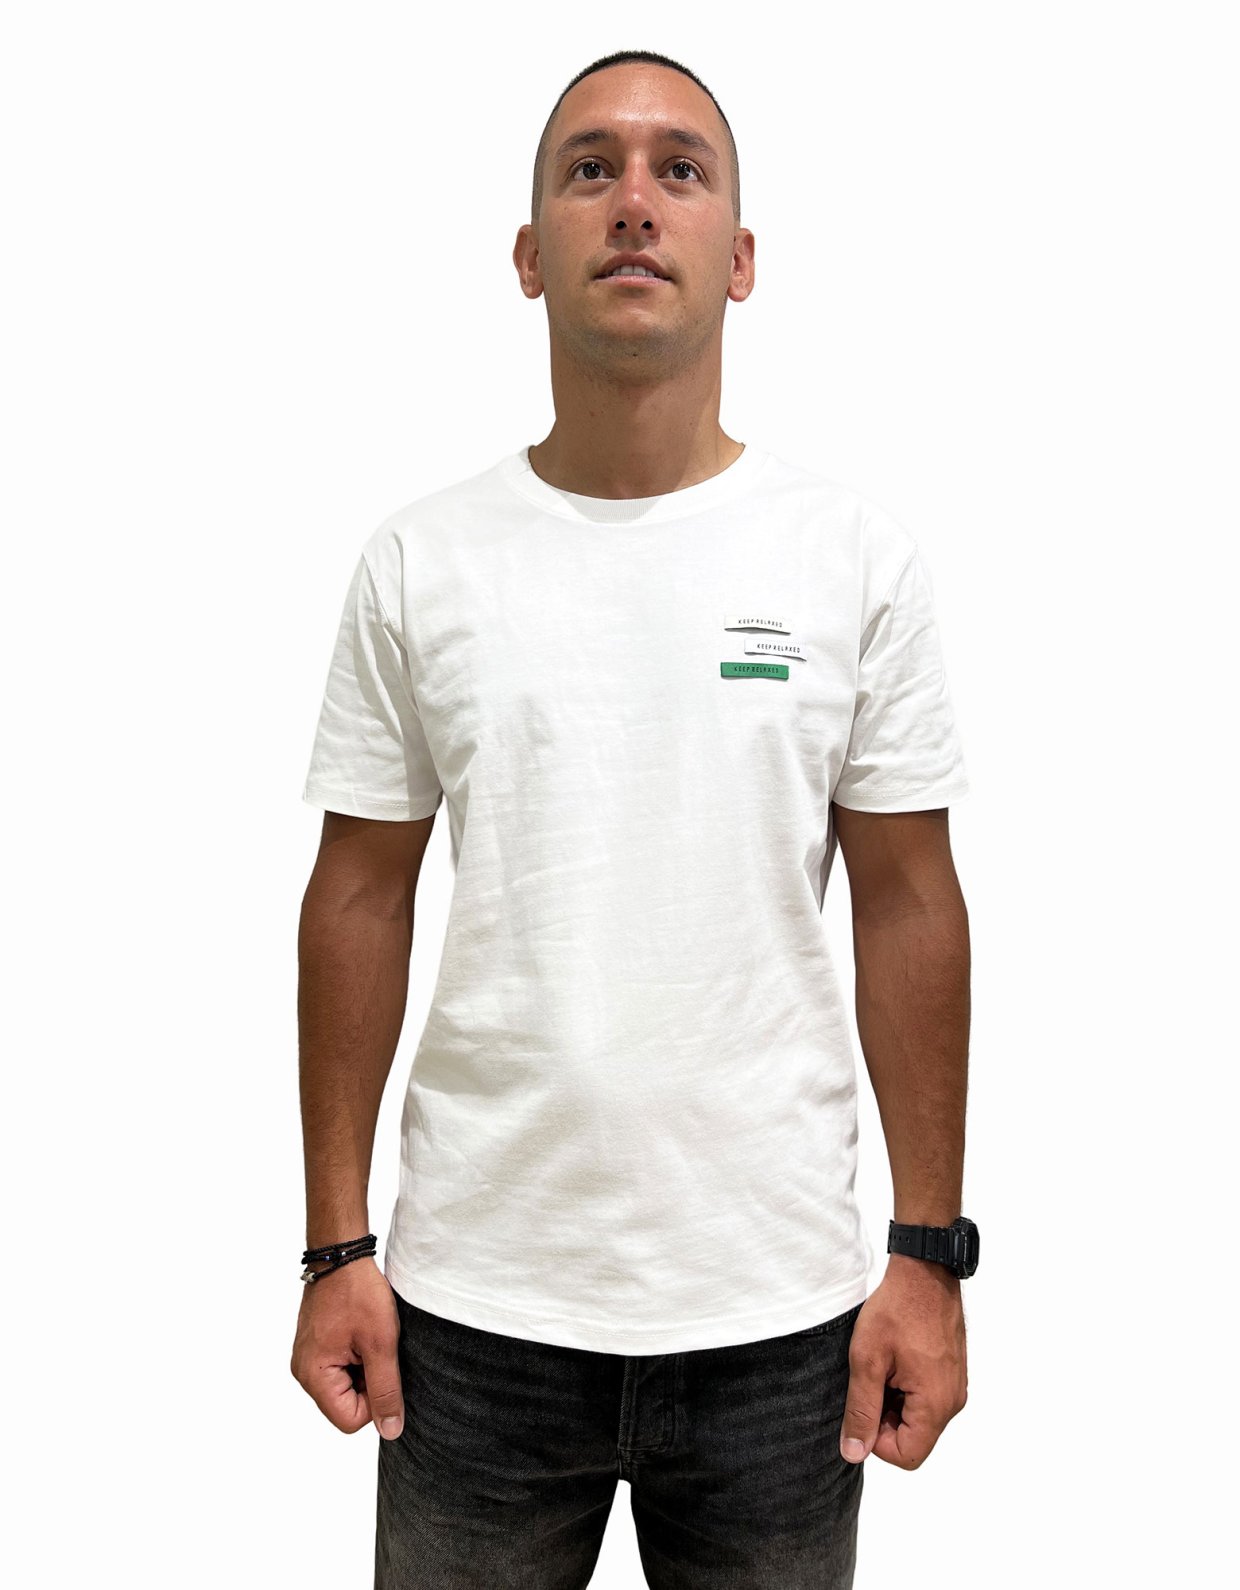 Gianni Lupo Keep relaxed t-shirt white